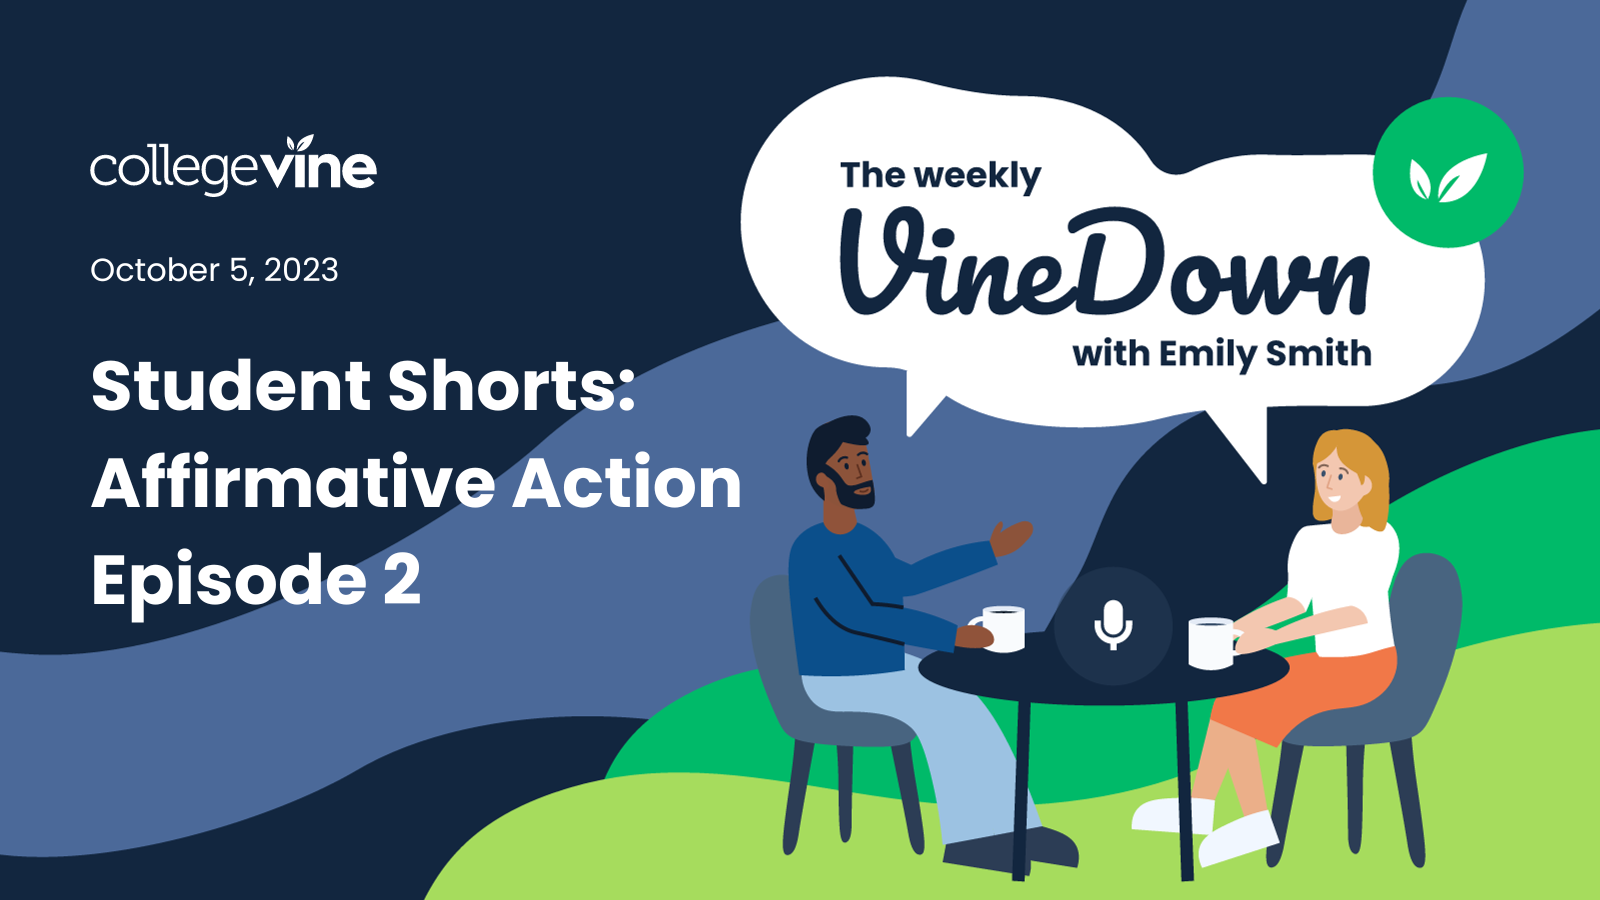 The Weekly VineDown: Affirmative Action Student Short Episode 2